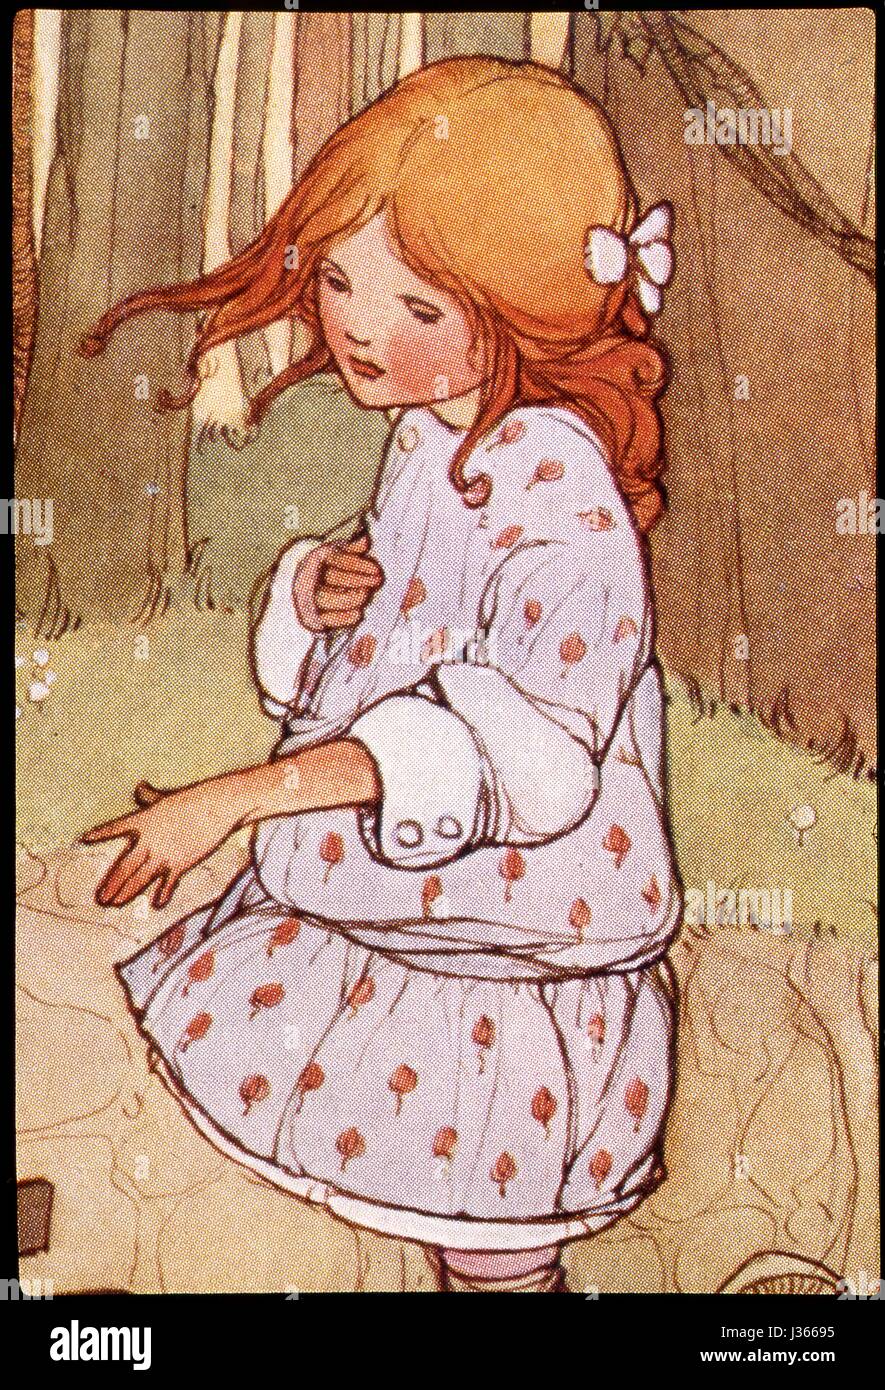 Illustration by Mabel Lucie Attwell  Alice in Wonderland, by Lewis Carroll  London, Raphael Tuck, 1910. Stock Photo